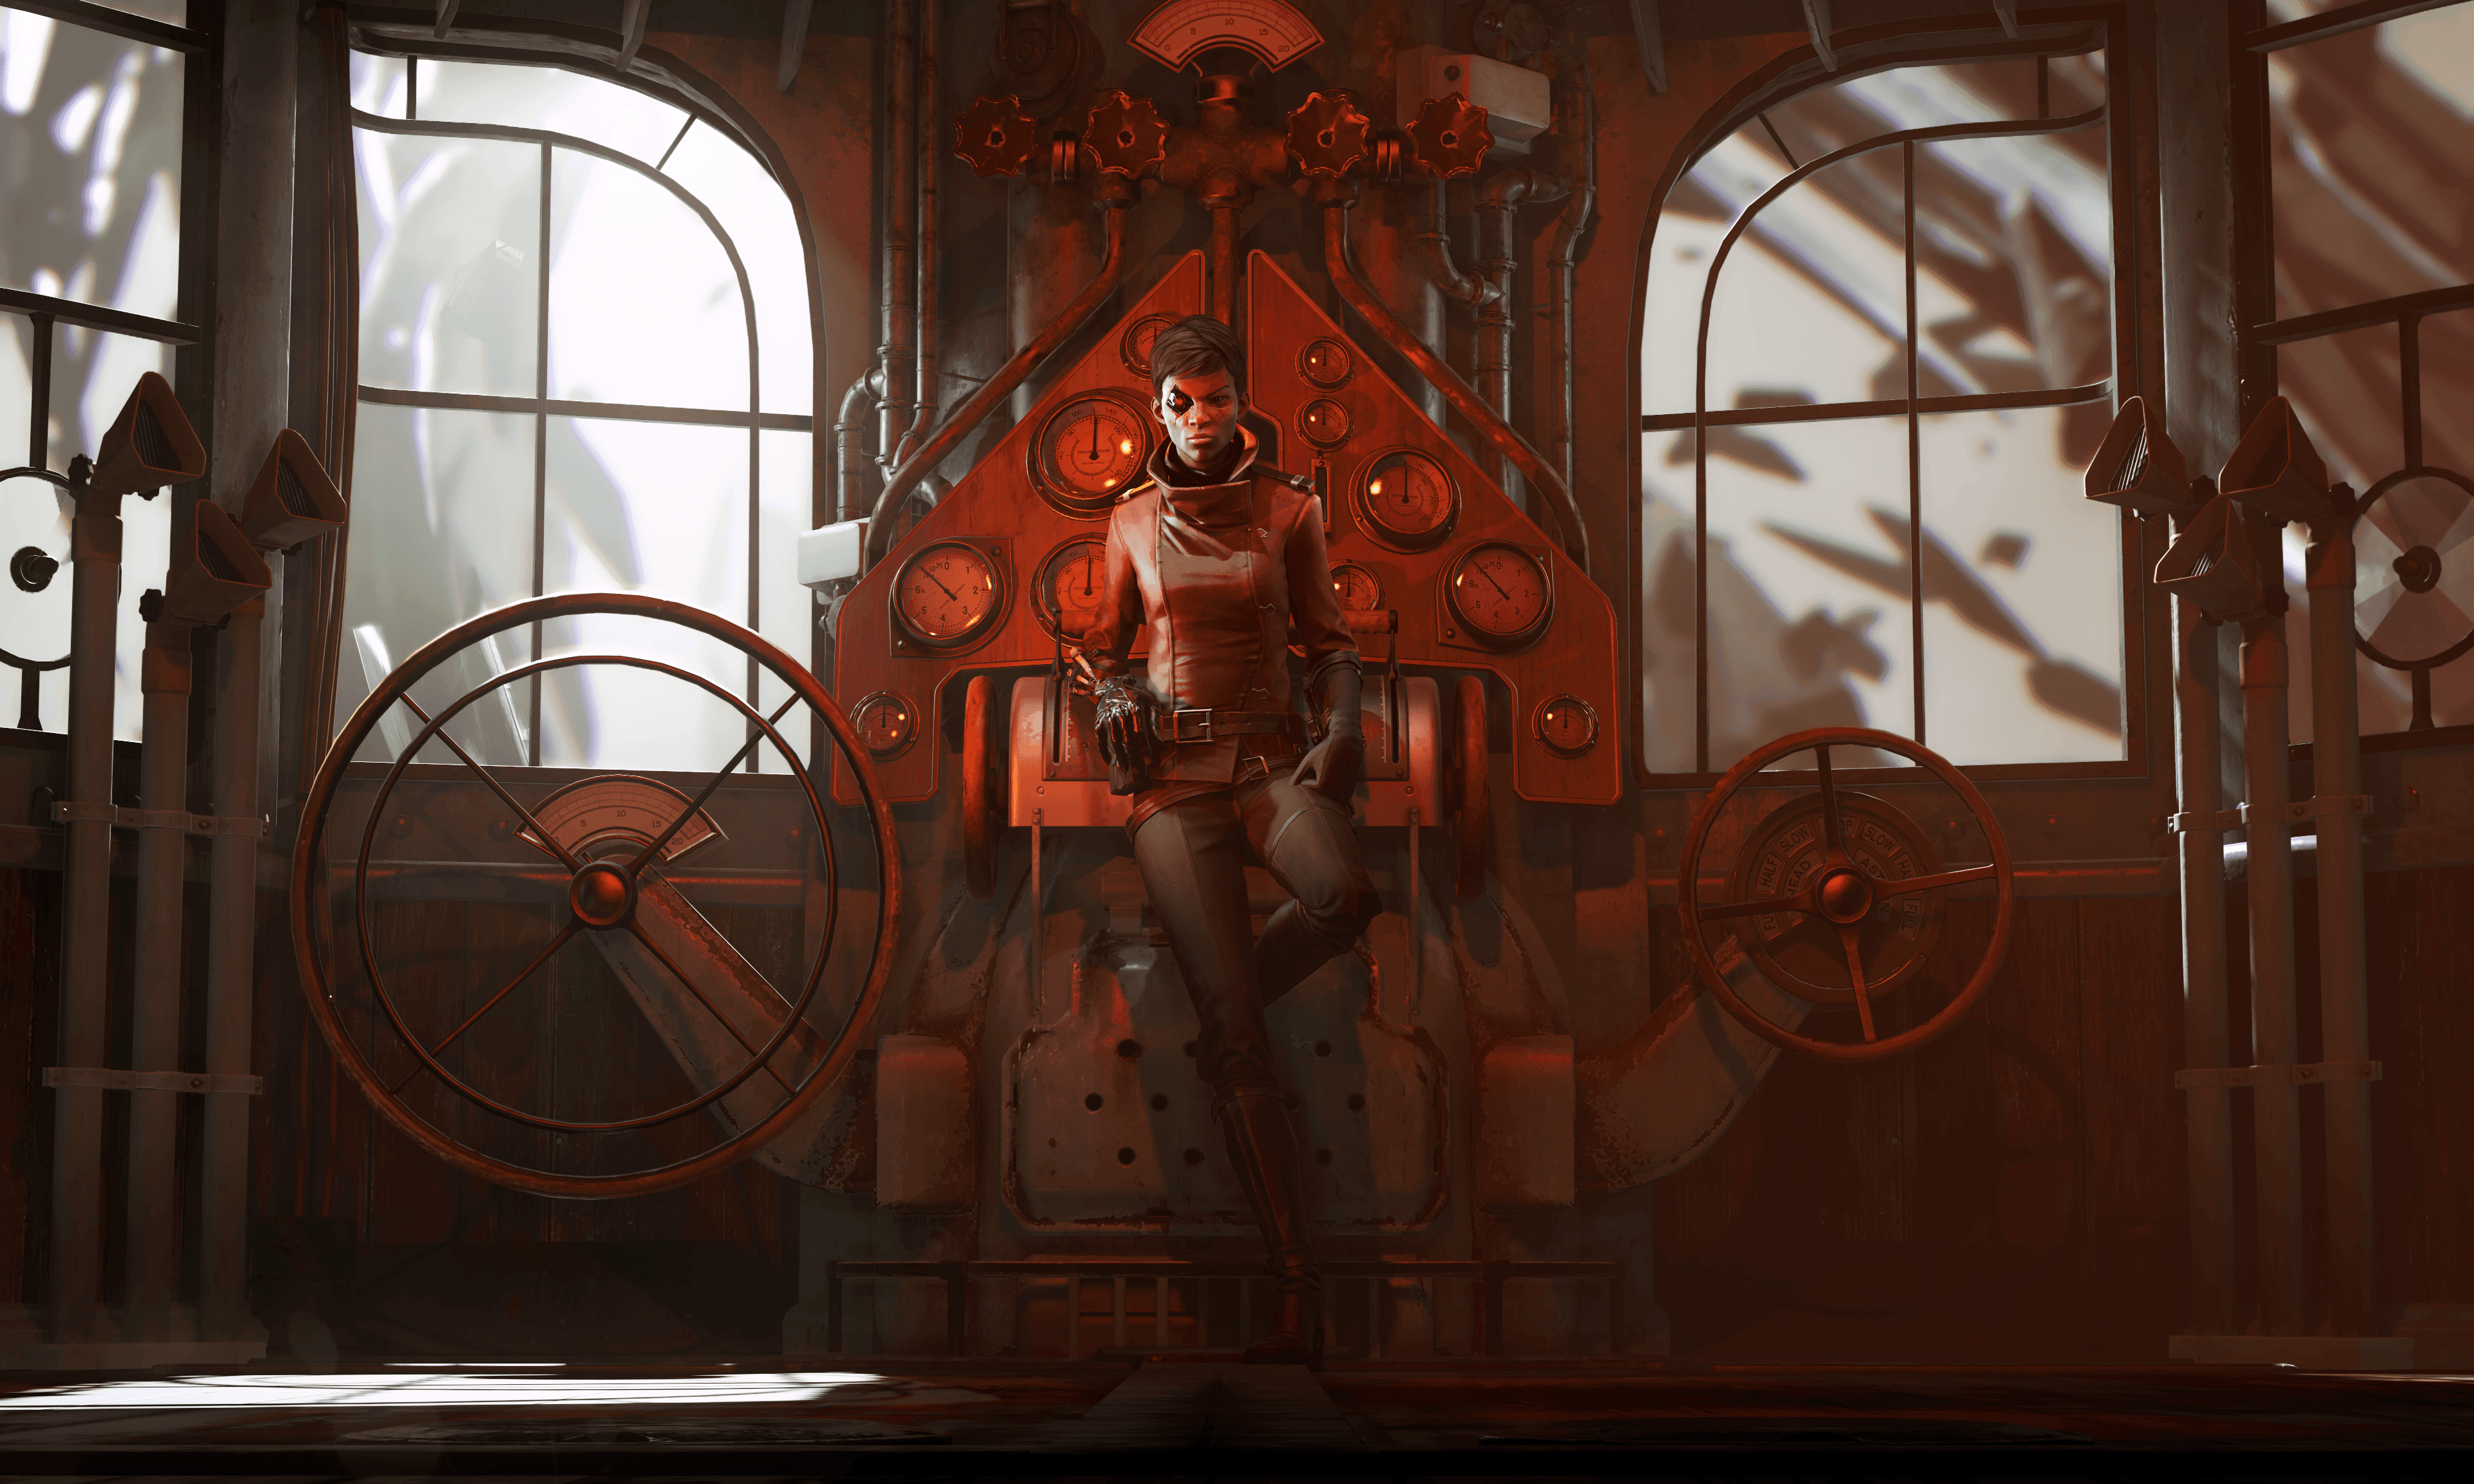 Video Game Dishonored: Death of the Outsider HD Wallpaper | Background Image